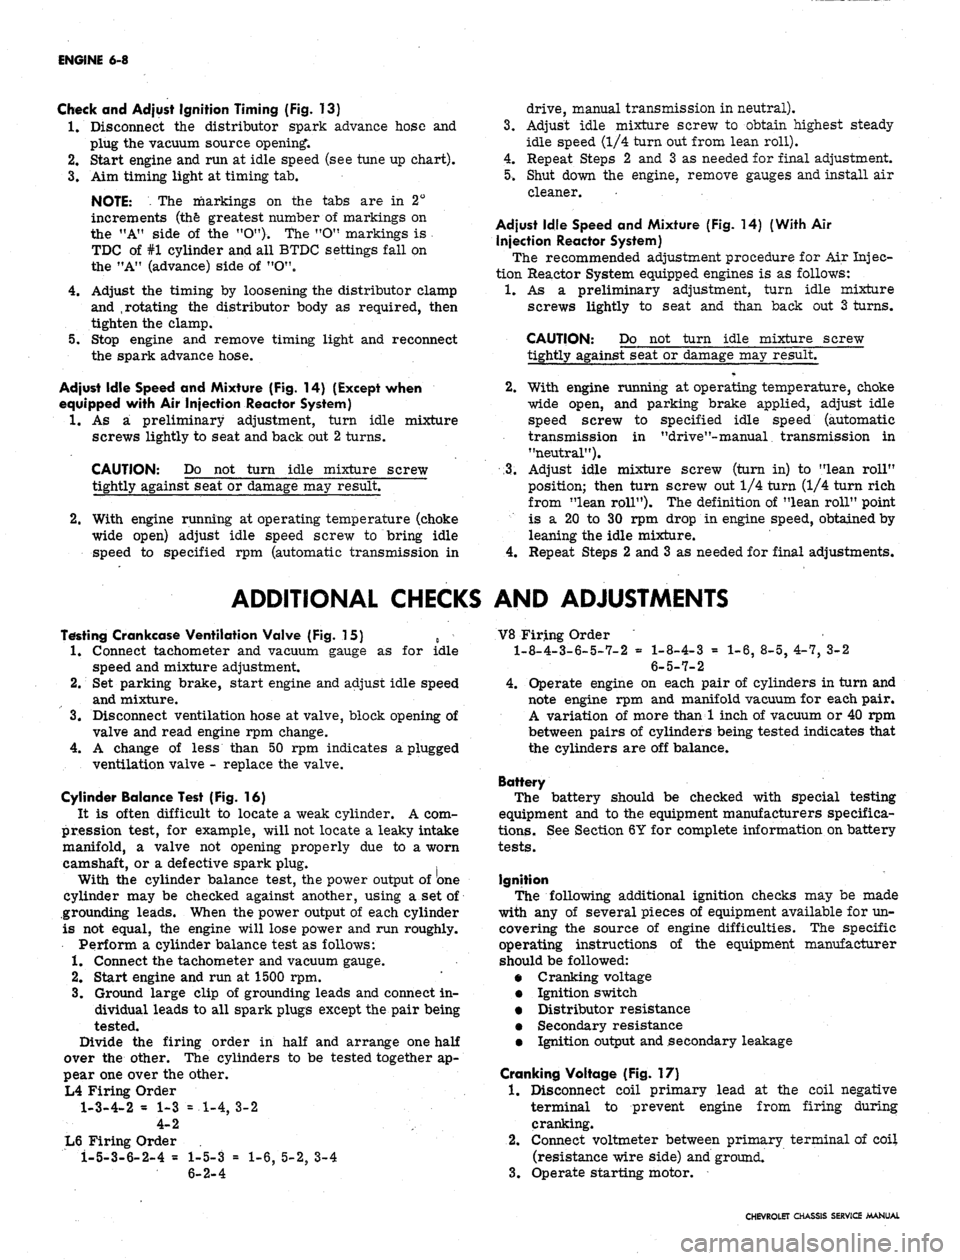 CHEVROLET CAMARO 1967 1.G Chassis Service Manual 
ENGINE
 6-8

Check
 and
 Adjust Ignition Timing
 (Fig. 13)

1.
 Disconnect
 the
 distributor spark advance hose
 and

plug
 the
 vacuum source opening.

2.
 Start engine
 and run at
 idle speed
 (see